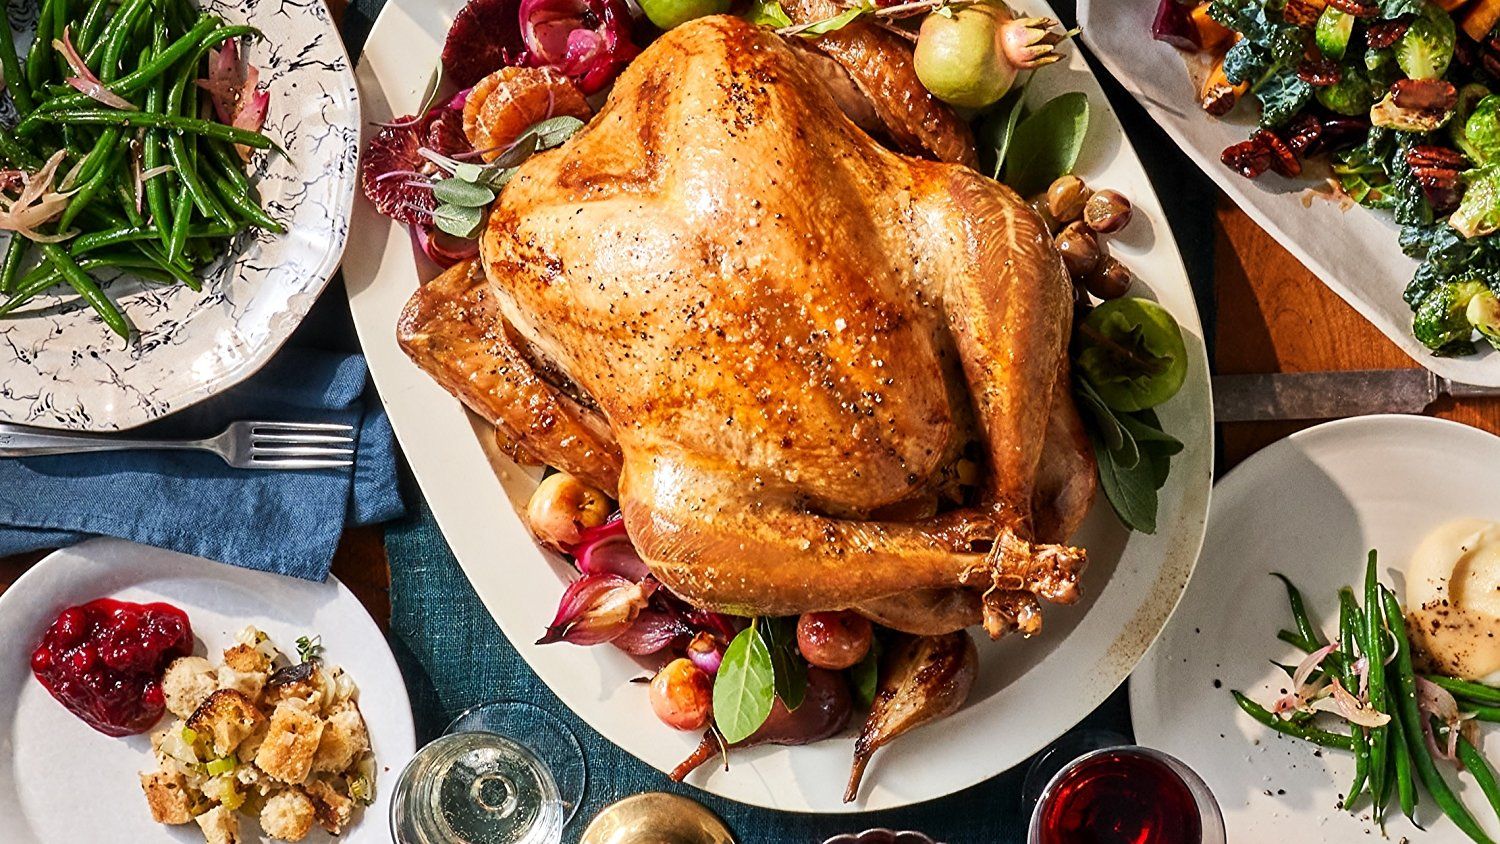 Previous Happening: Holiday Turkey Available!